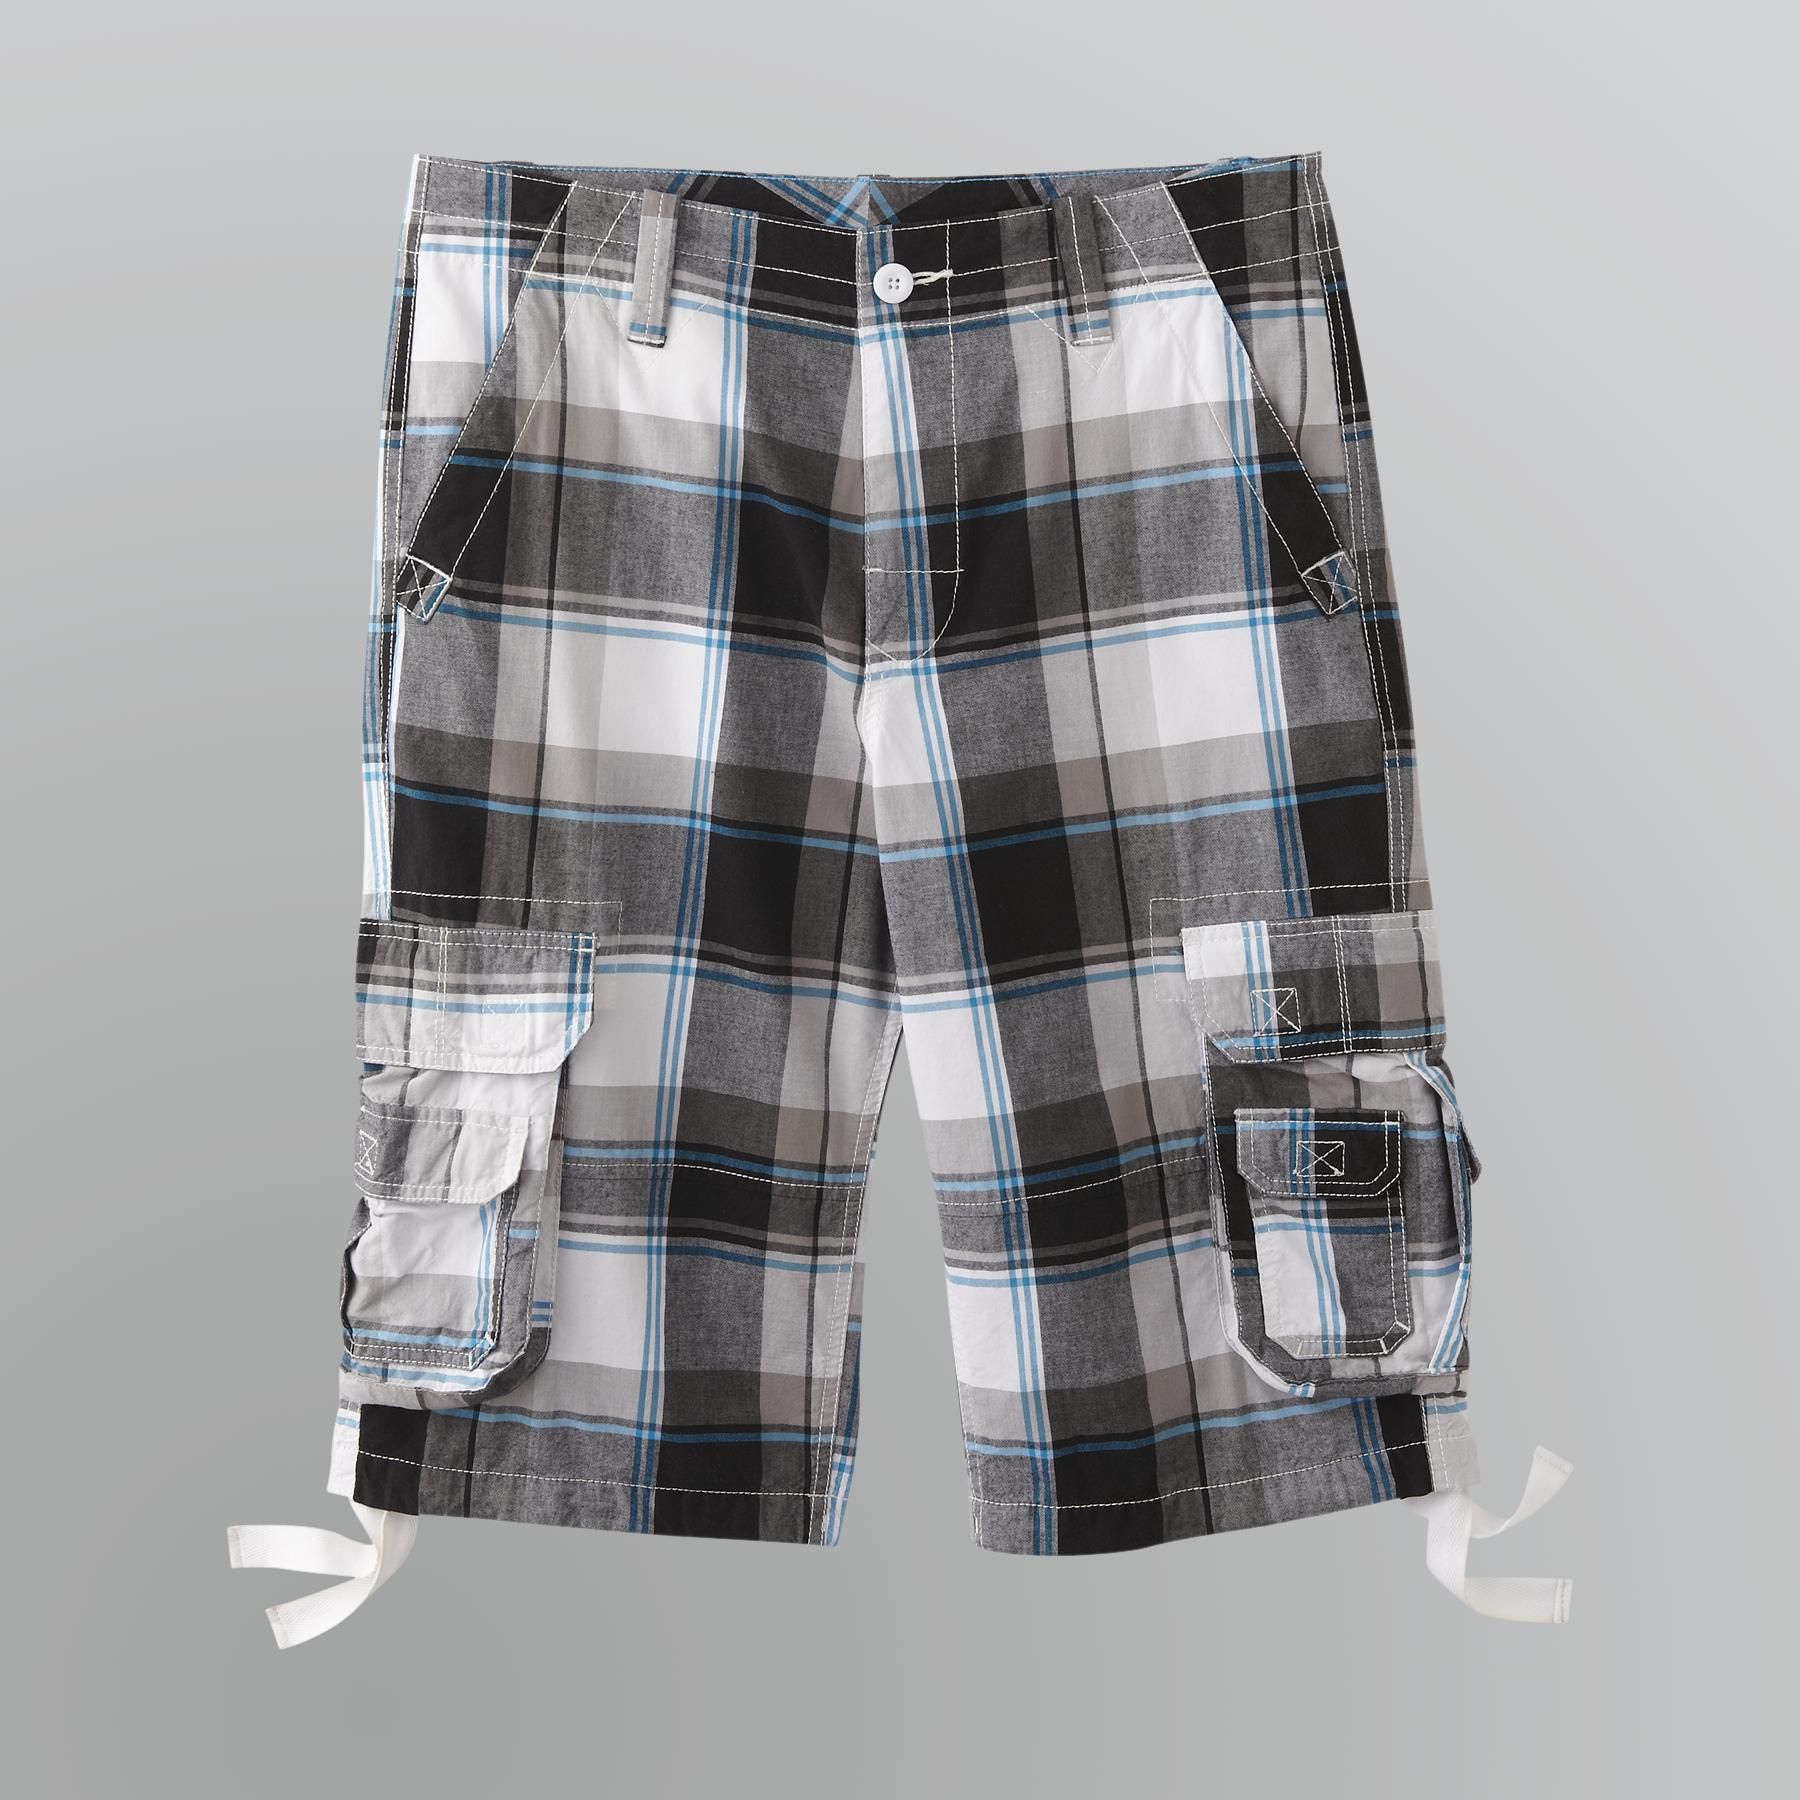 Roebuck & Co. Men's Belted Plaid Shorts